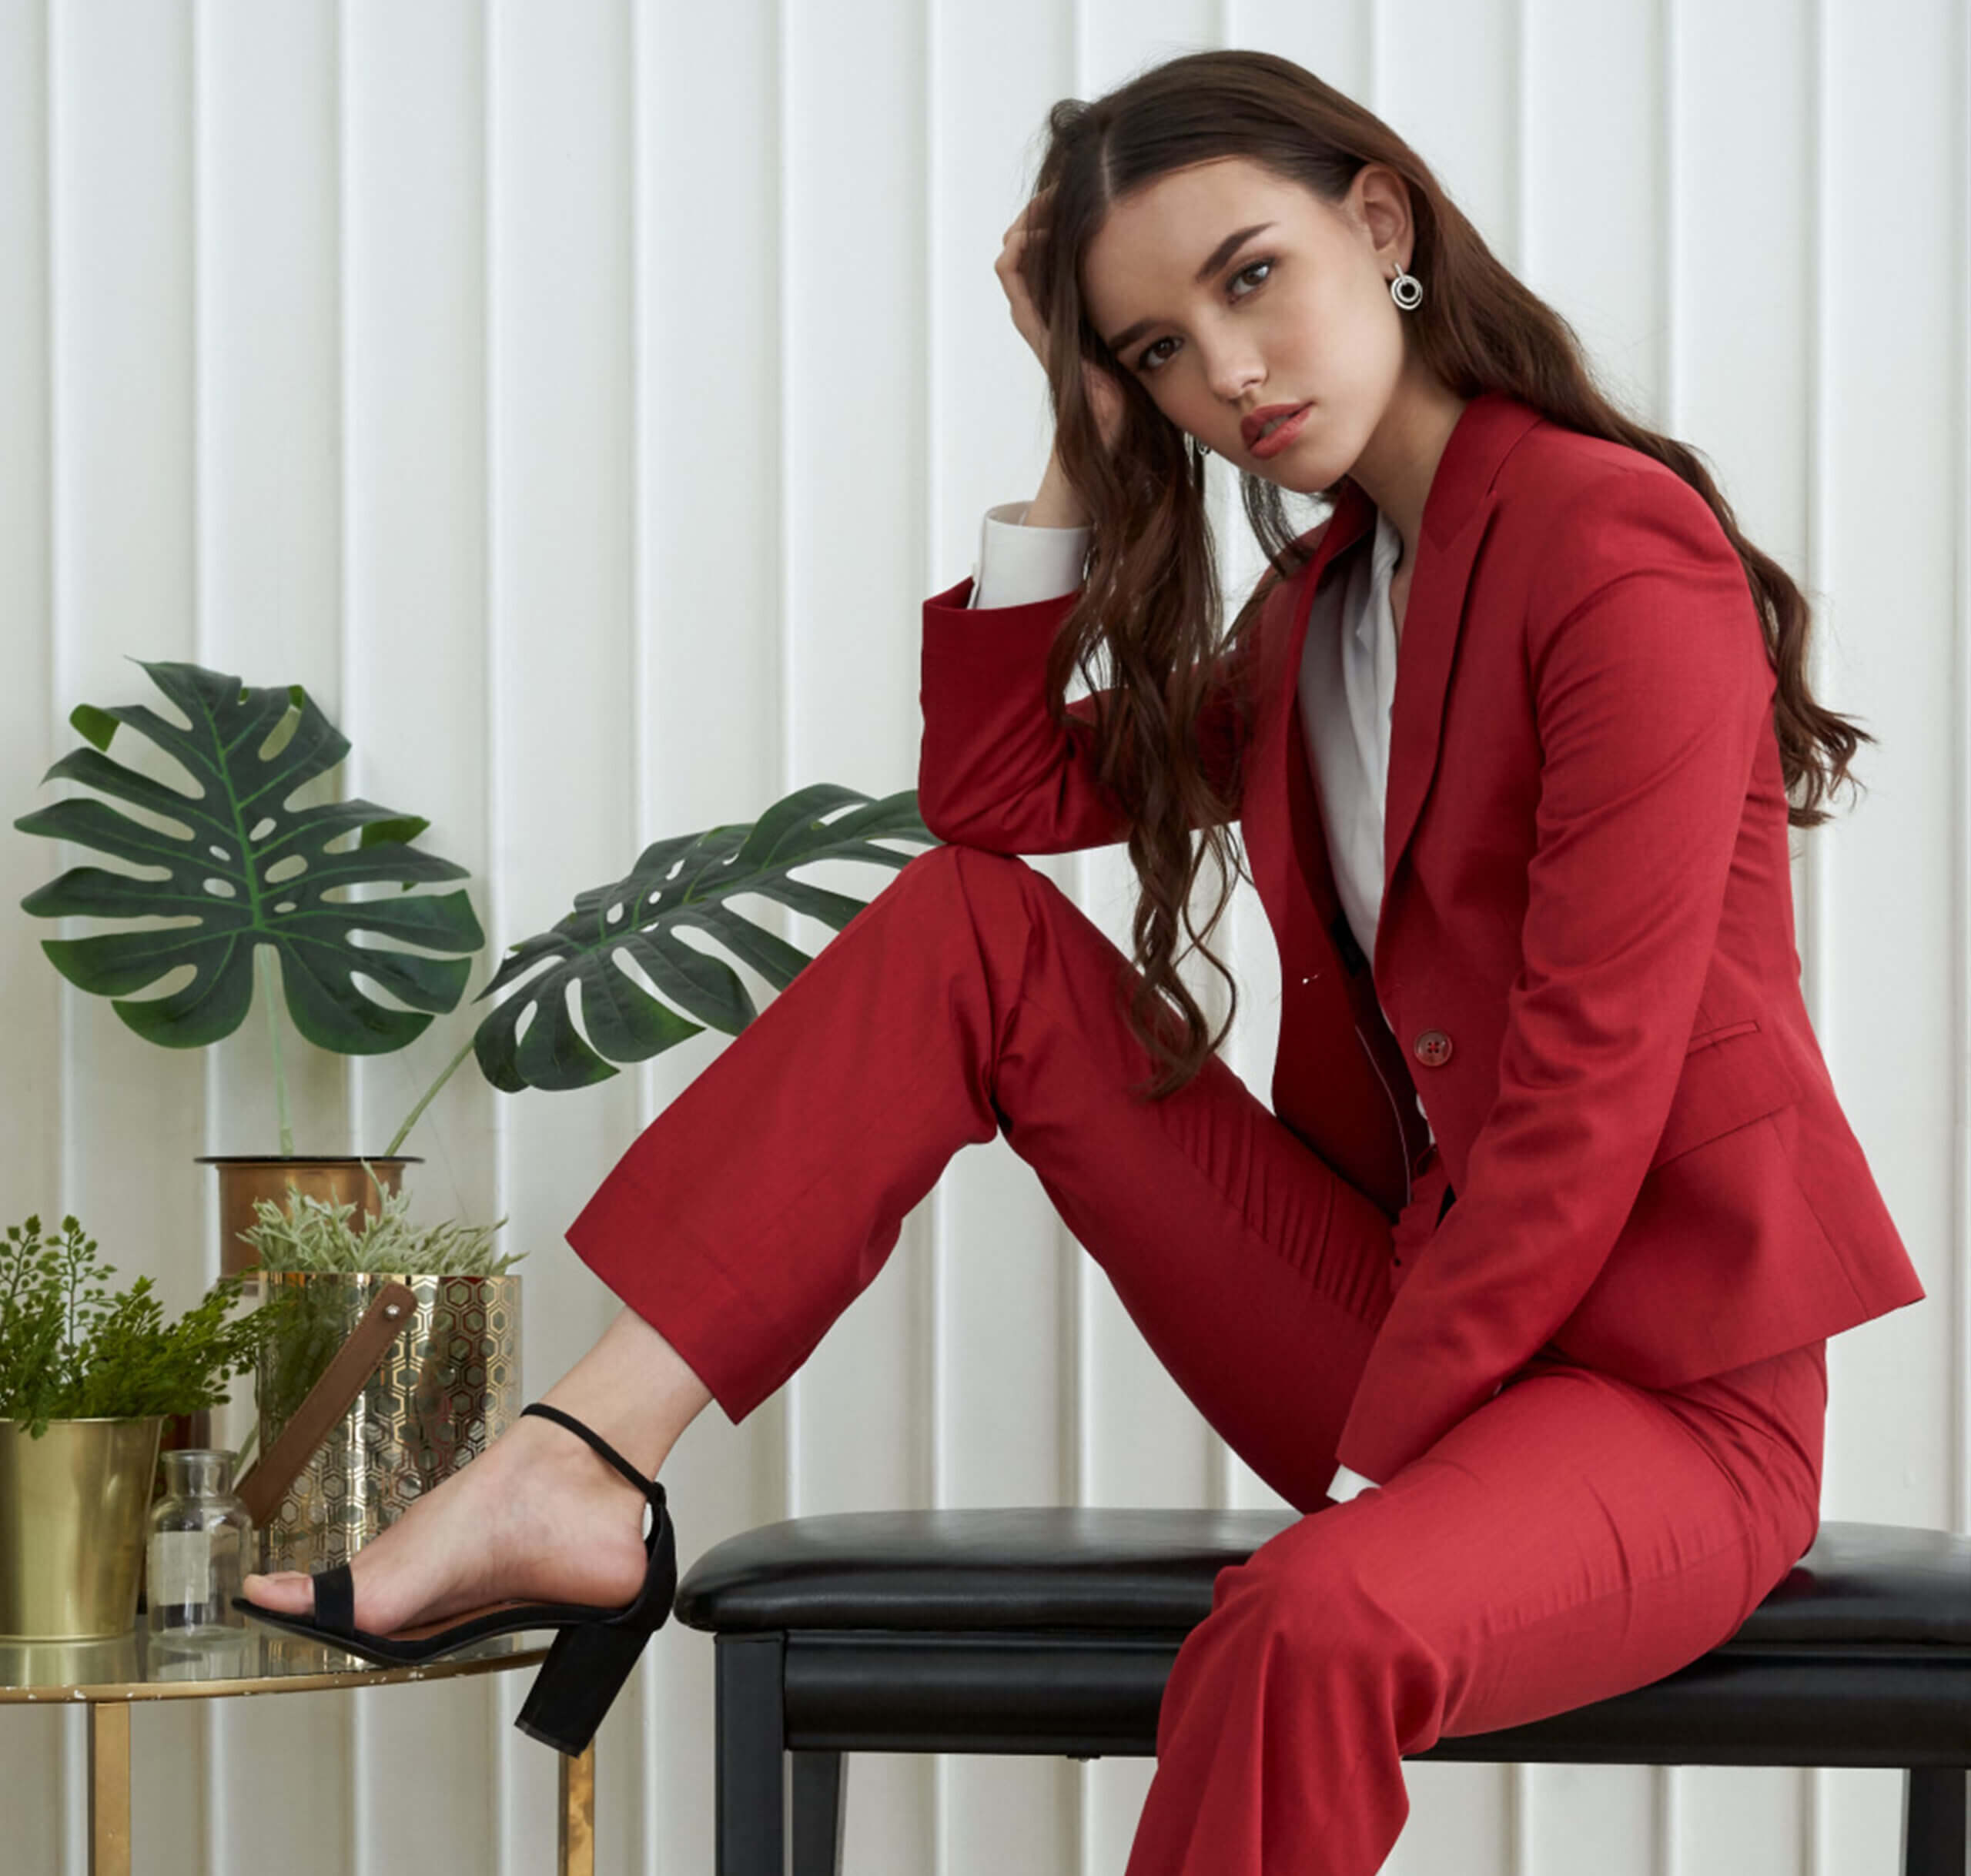 A young brown haired woman wearing tailored red trousers and a red jacket